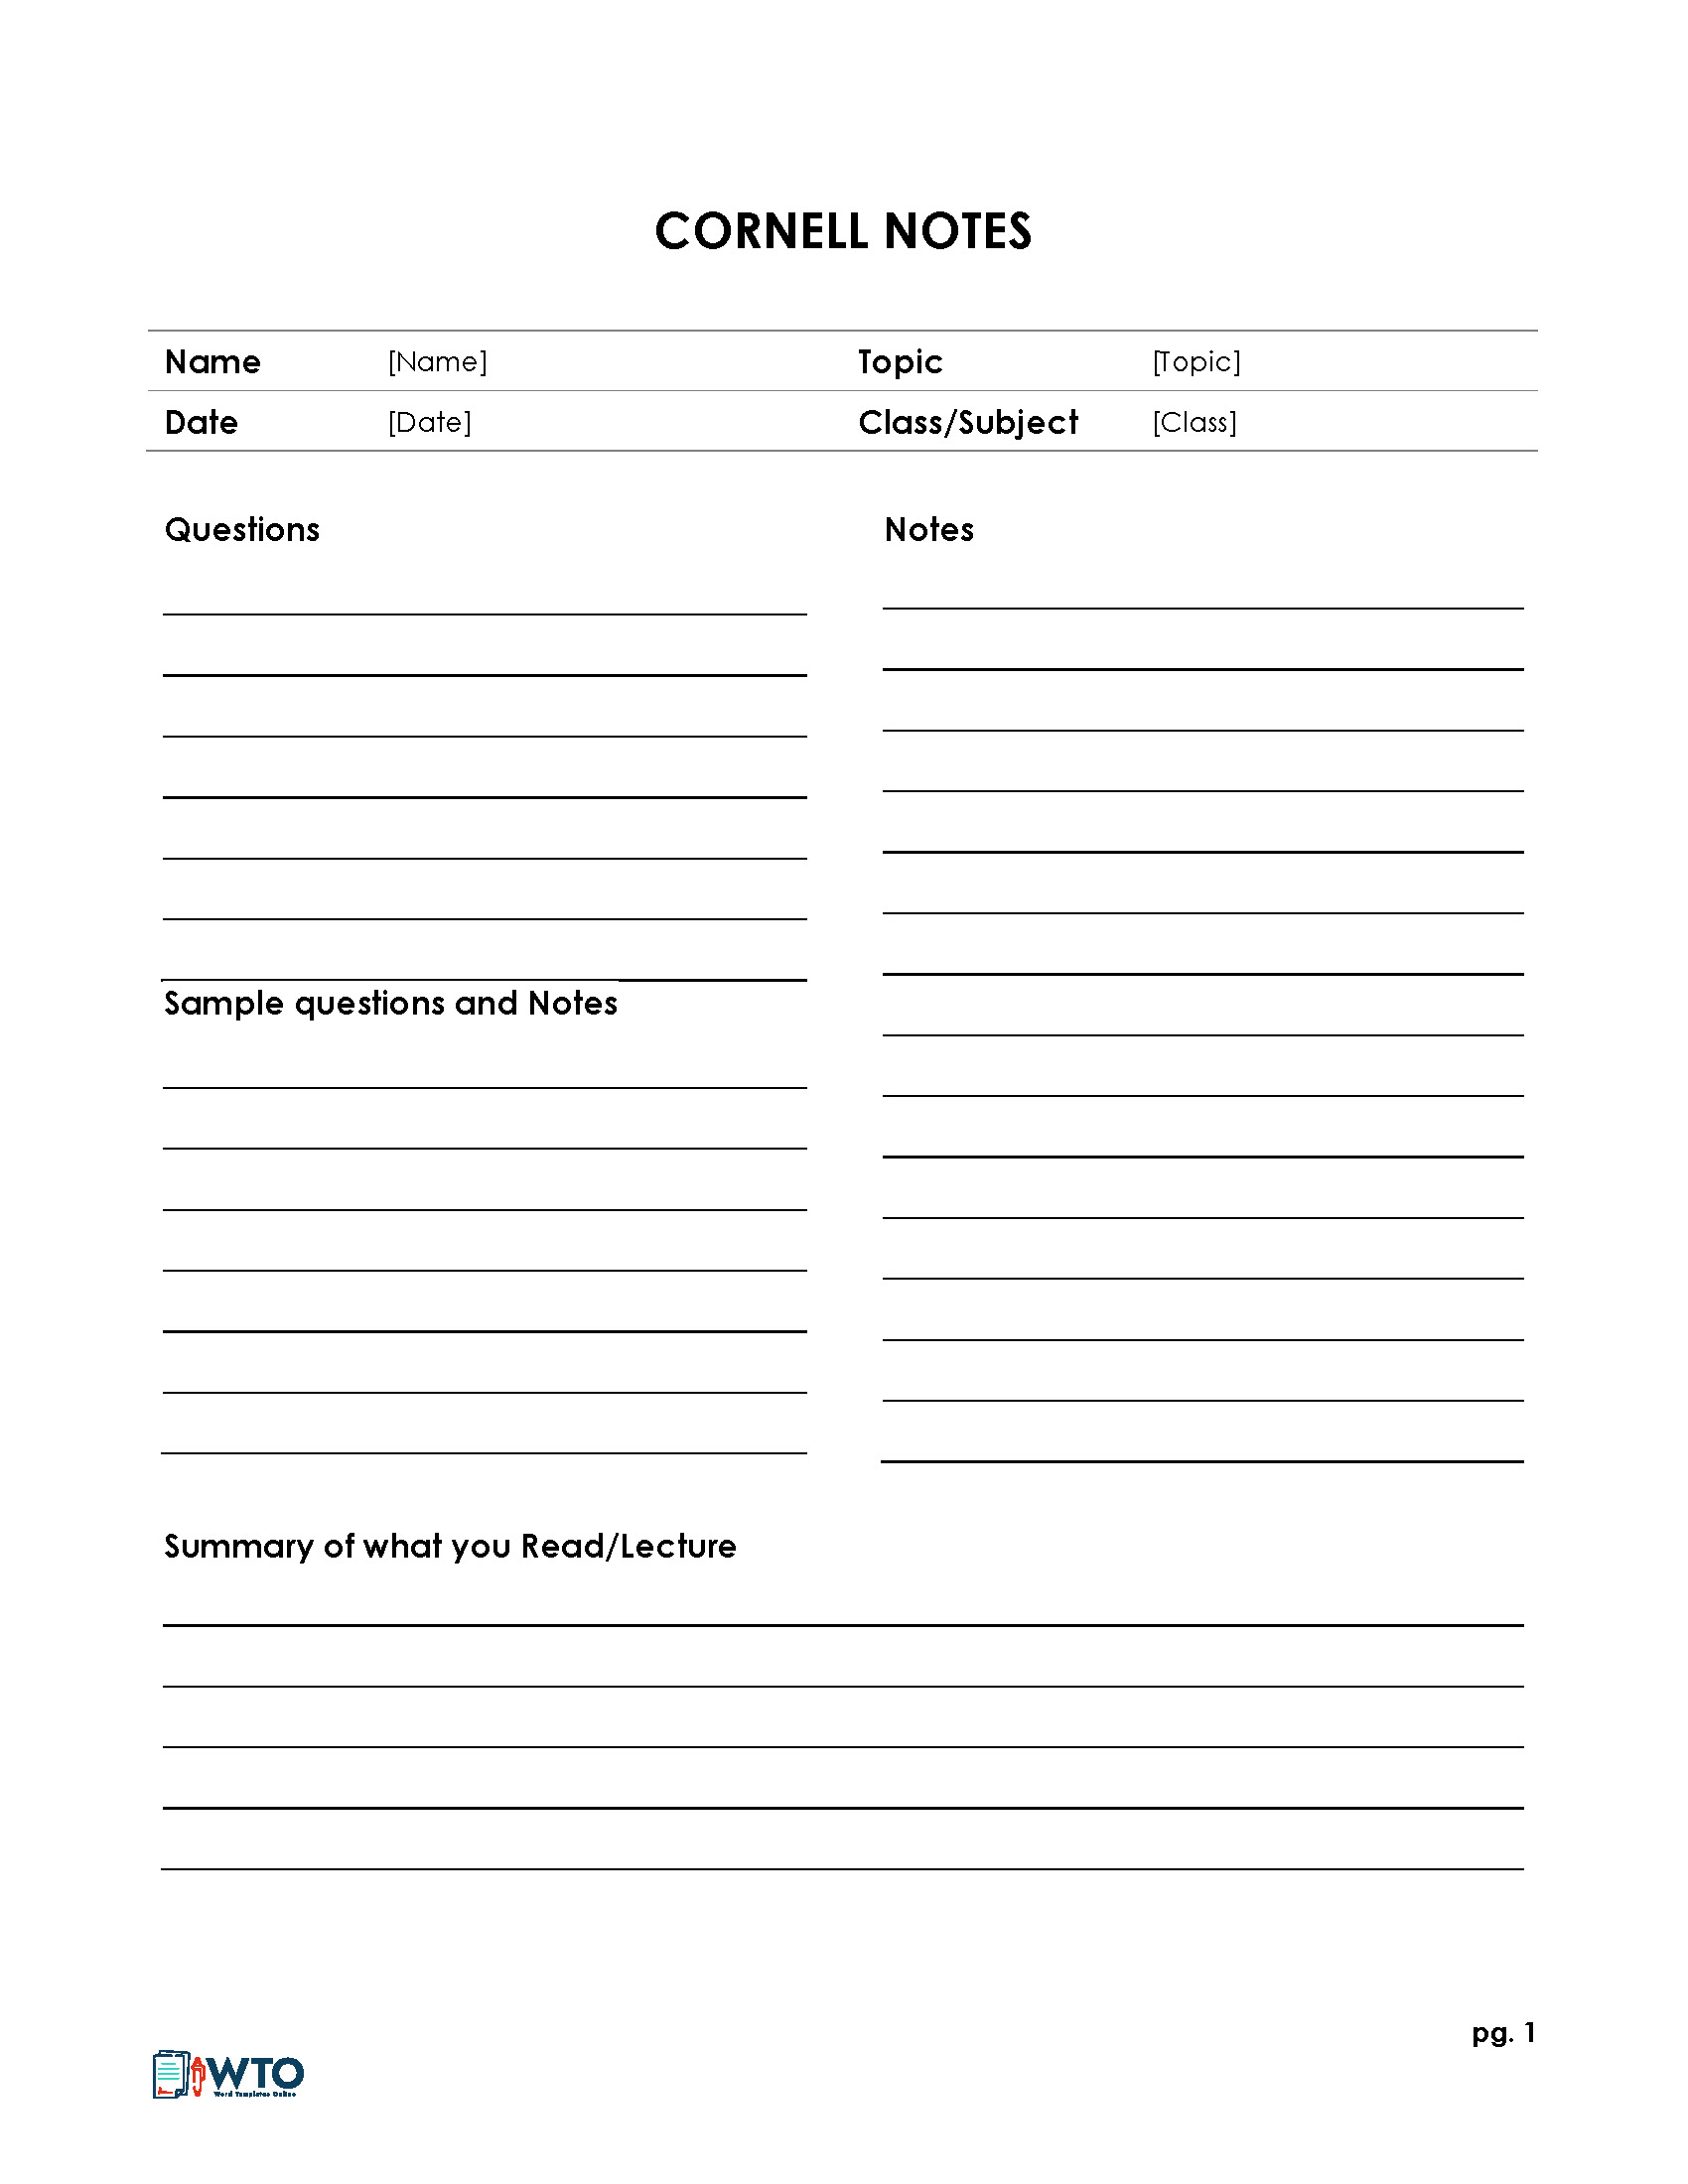 20 Free Cornell Note Templates (Cornell Note Taking Explained) With Cornell Notes Template Doc